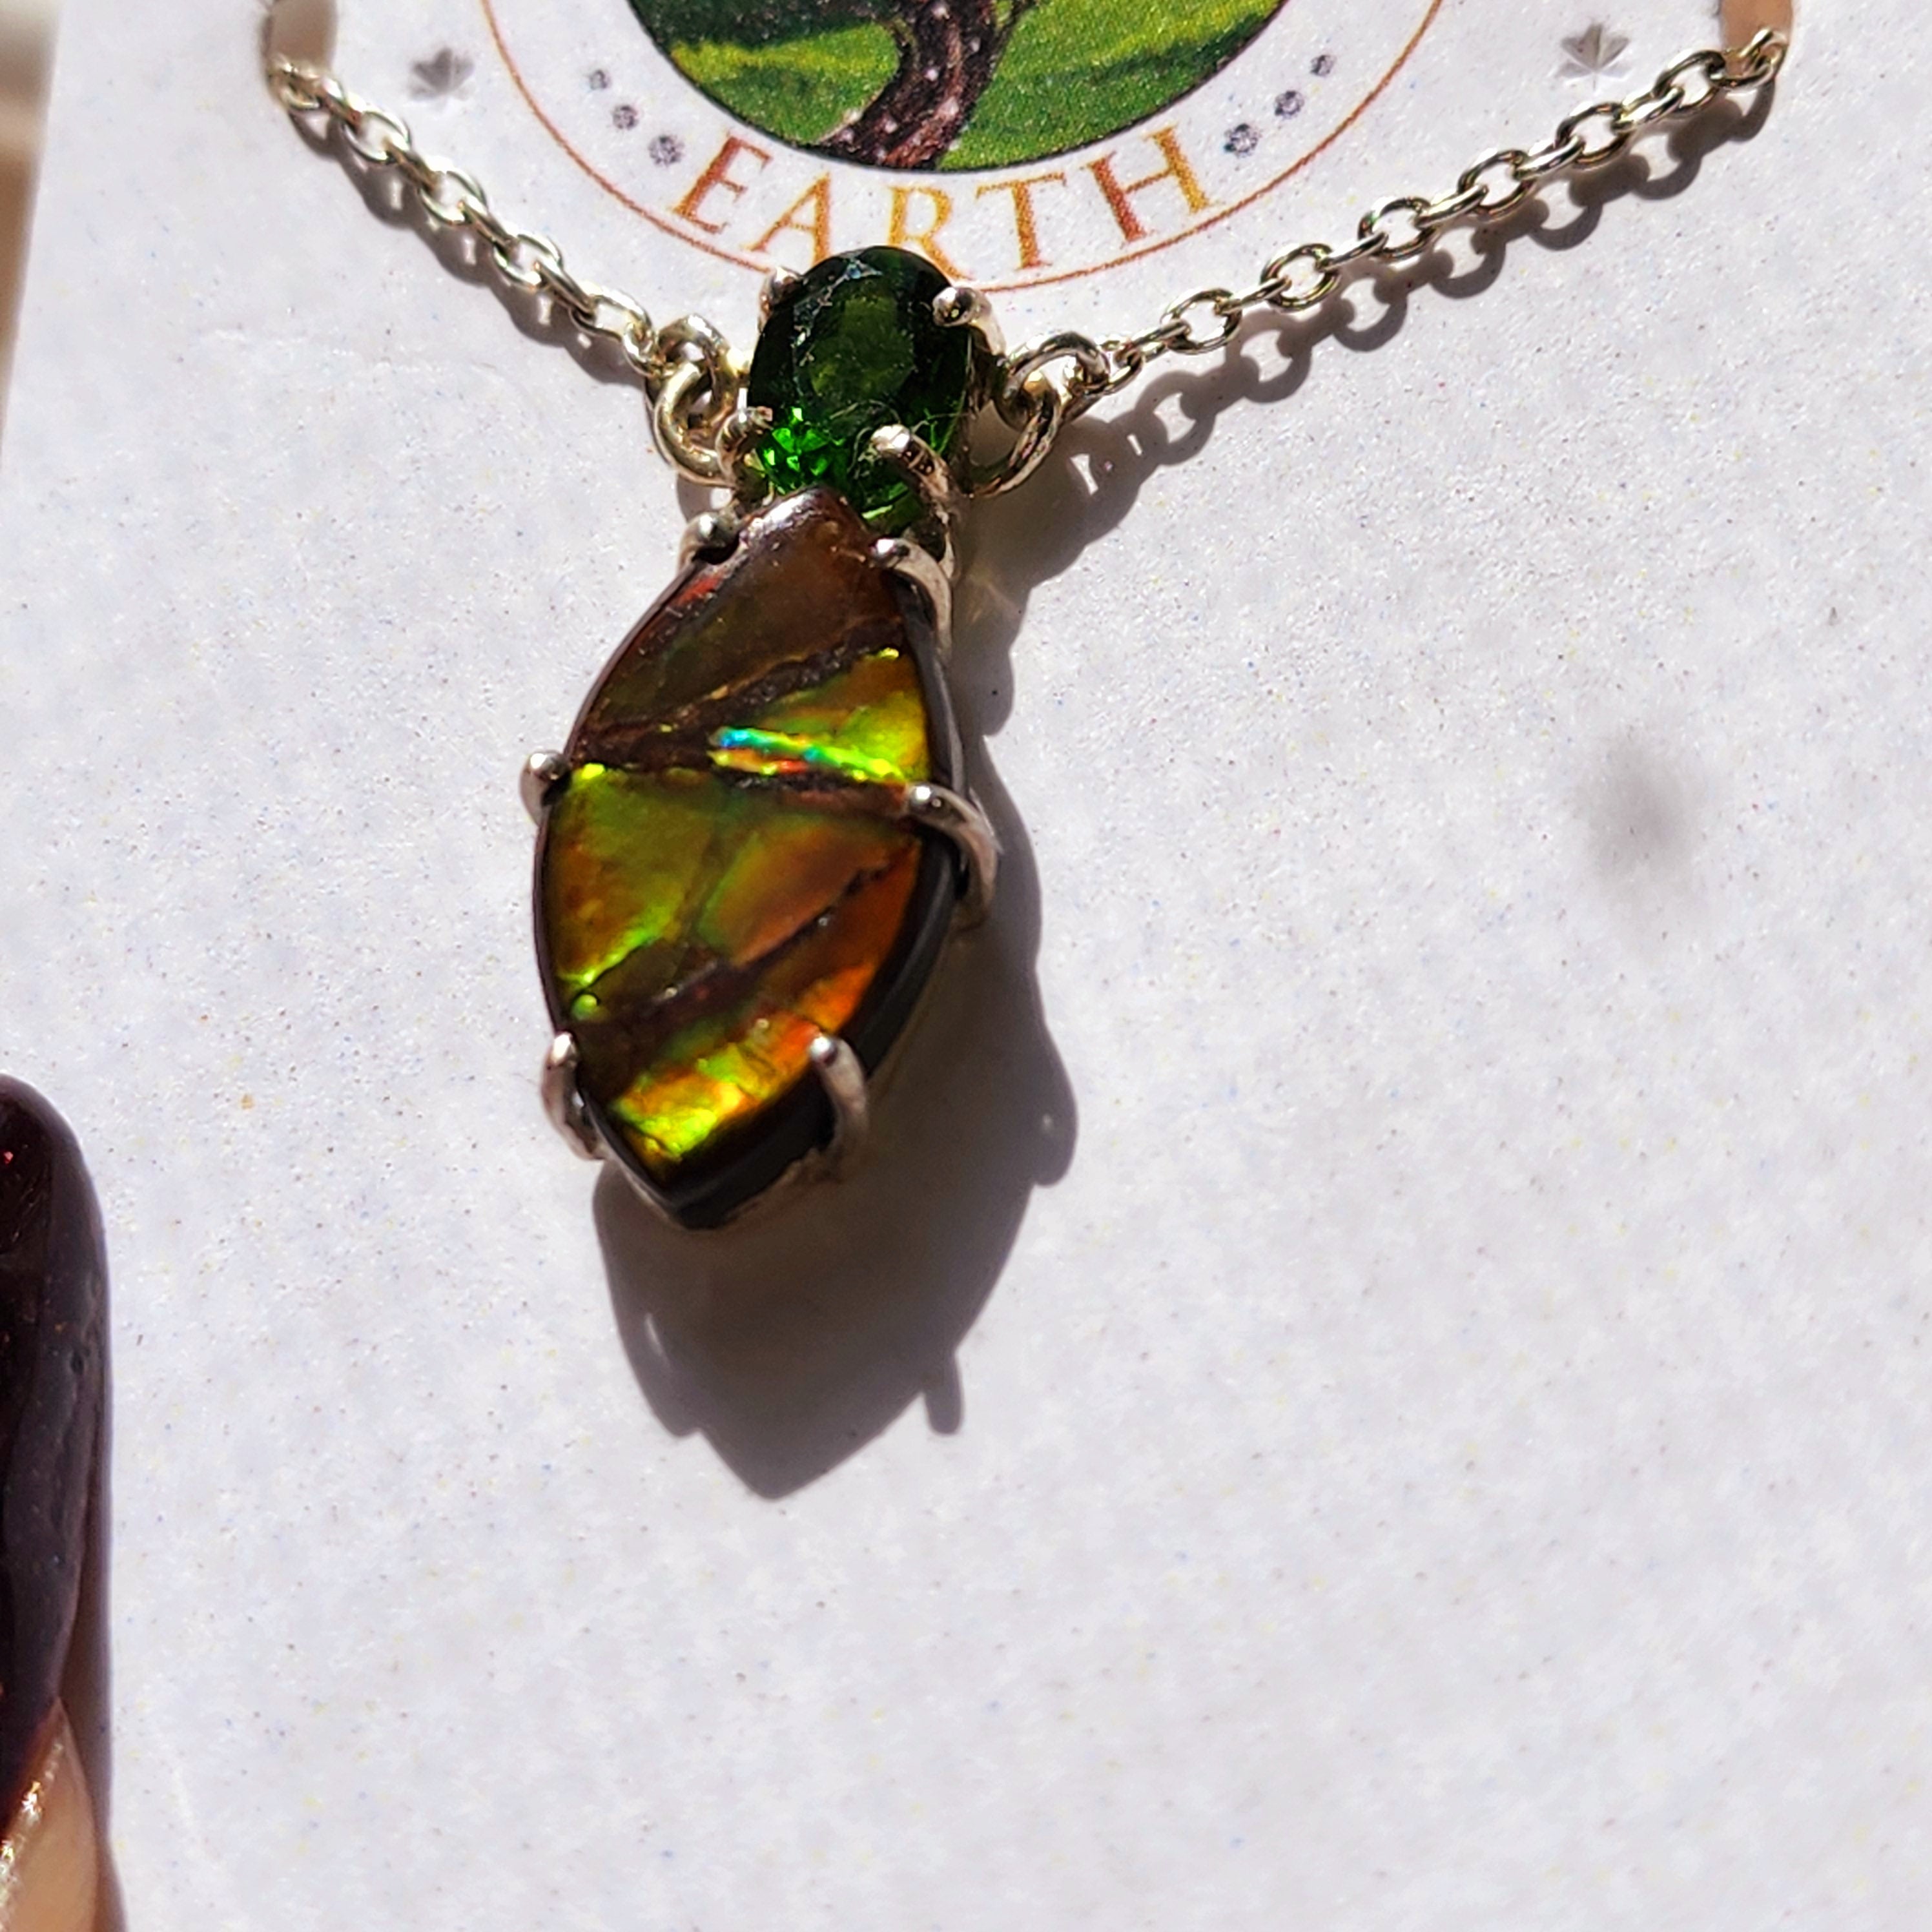 Ammolite x Green Tourmaline Necklace .925 Silver for Good Luck, Prosperity and Protection